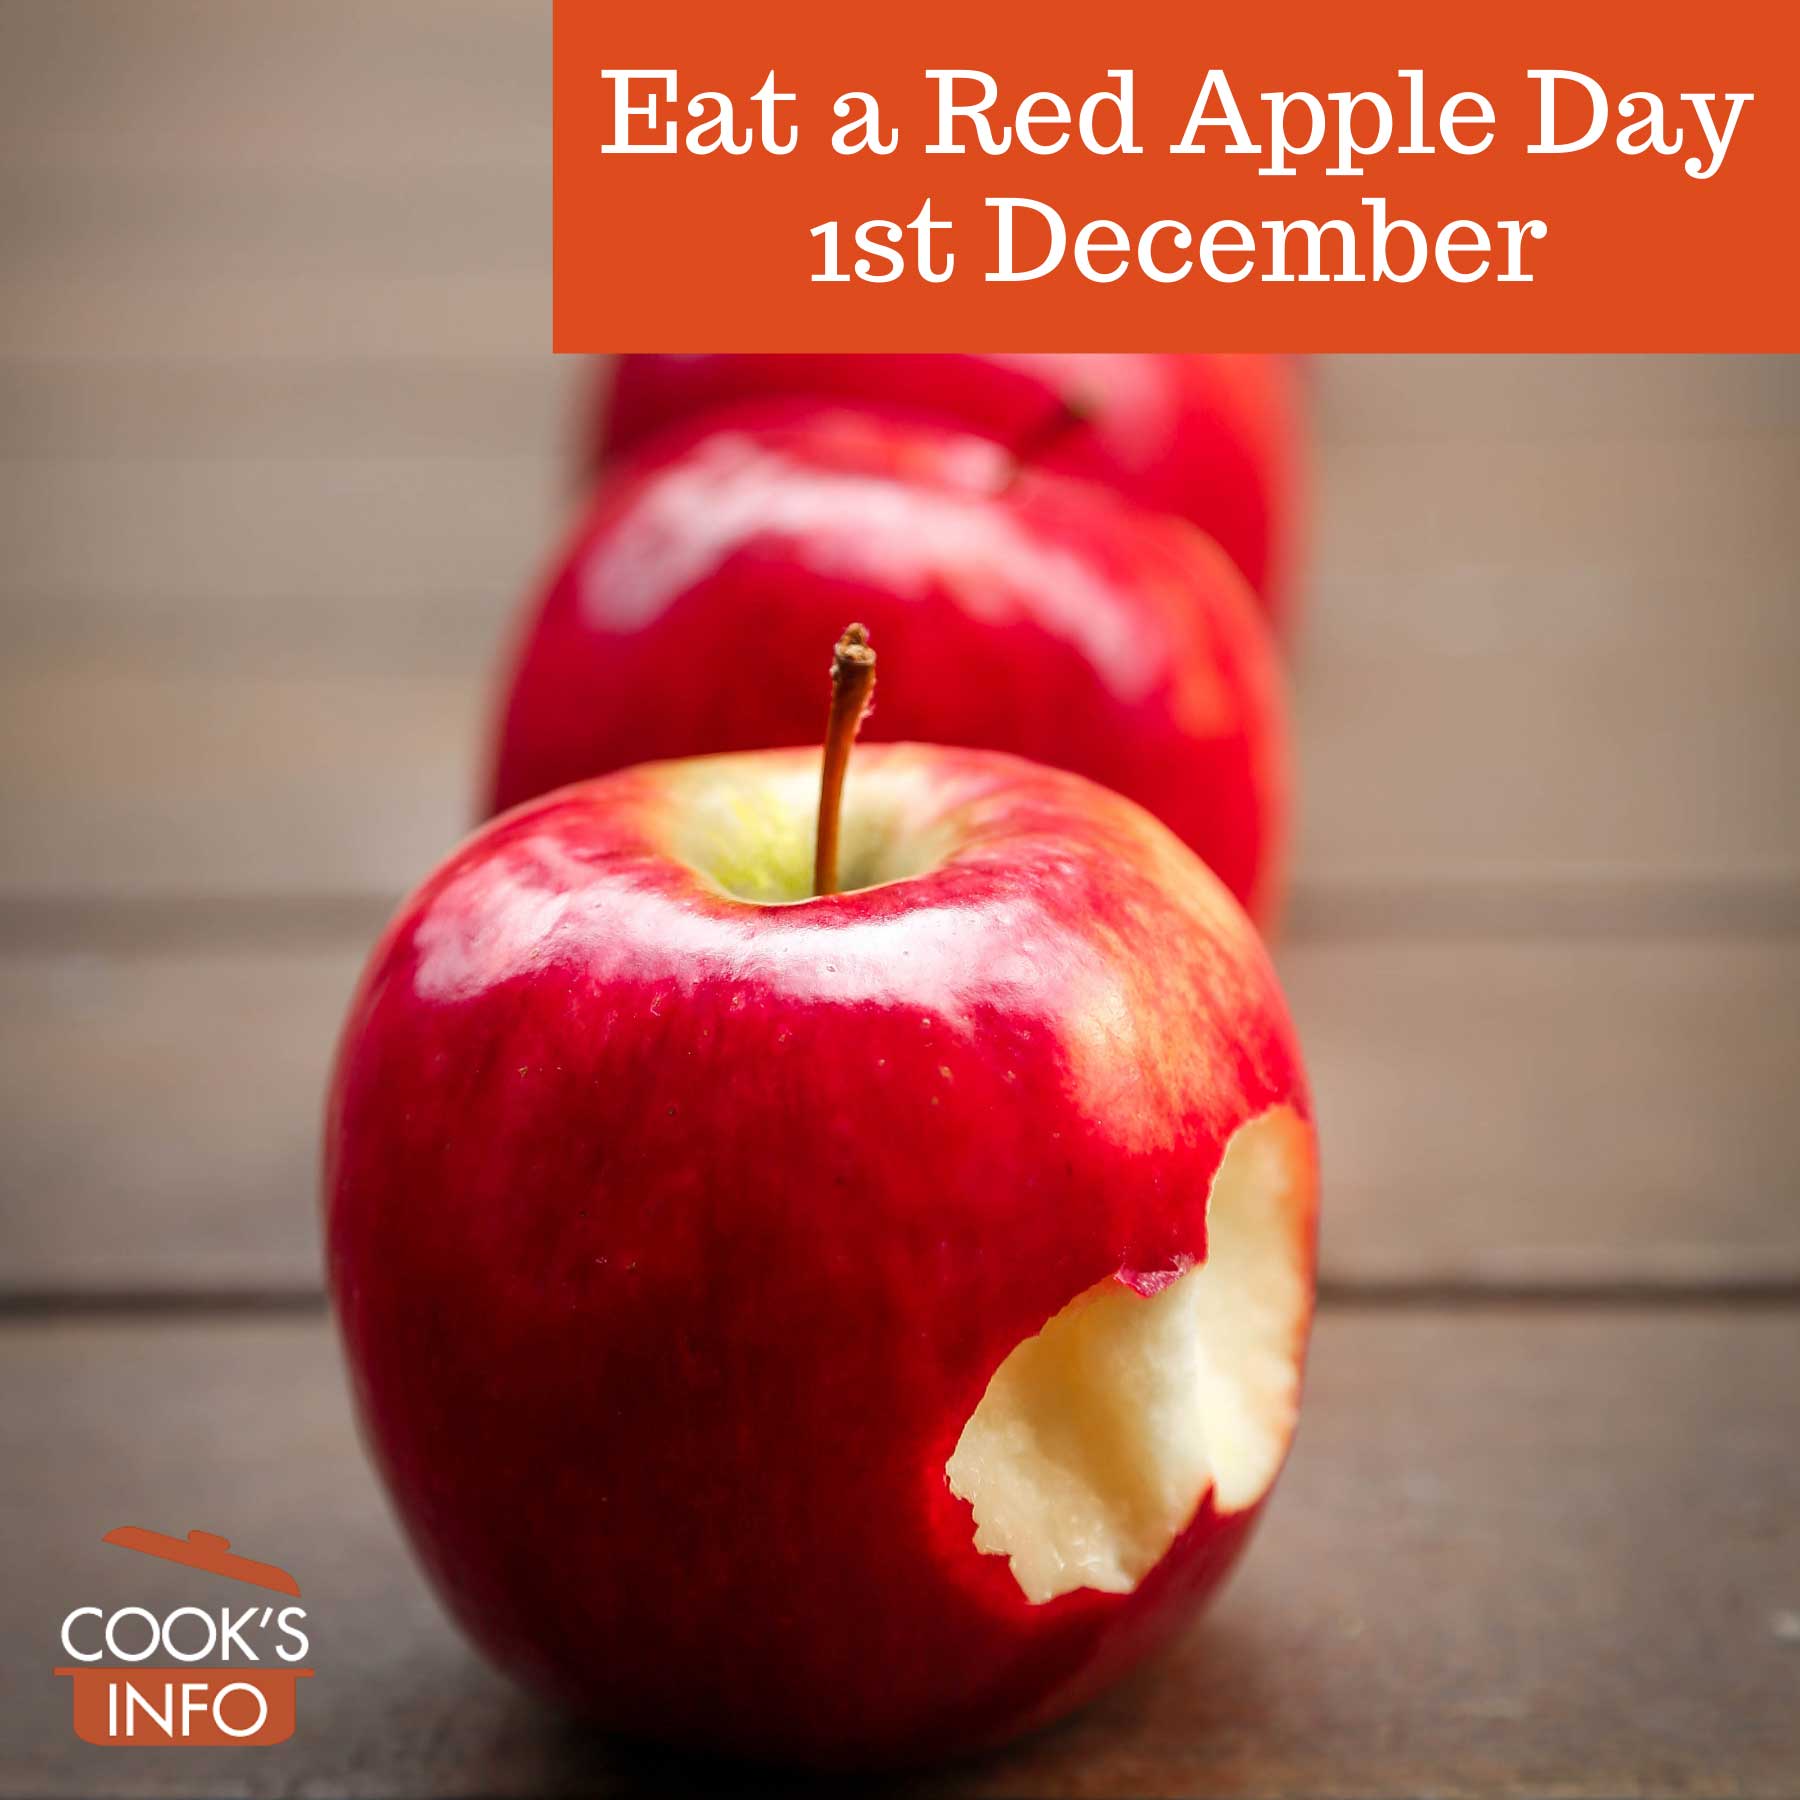 Eat-a-Red-Apple-Day-TN.jpg